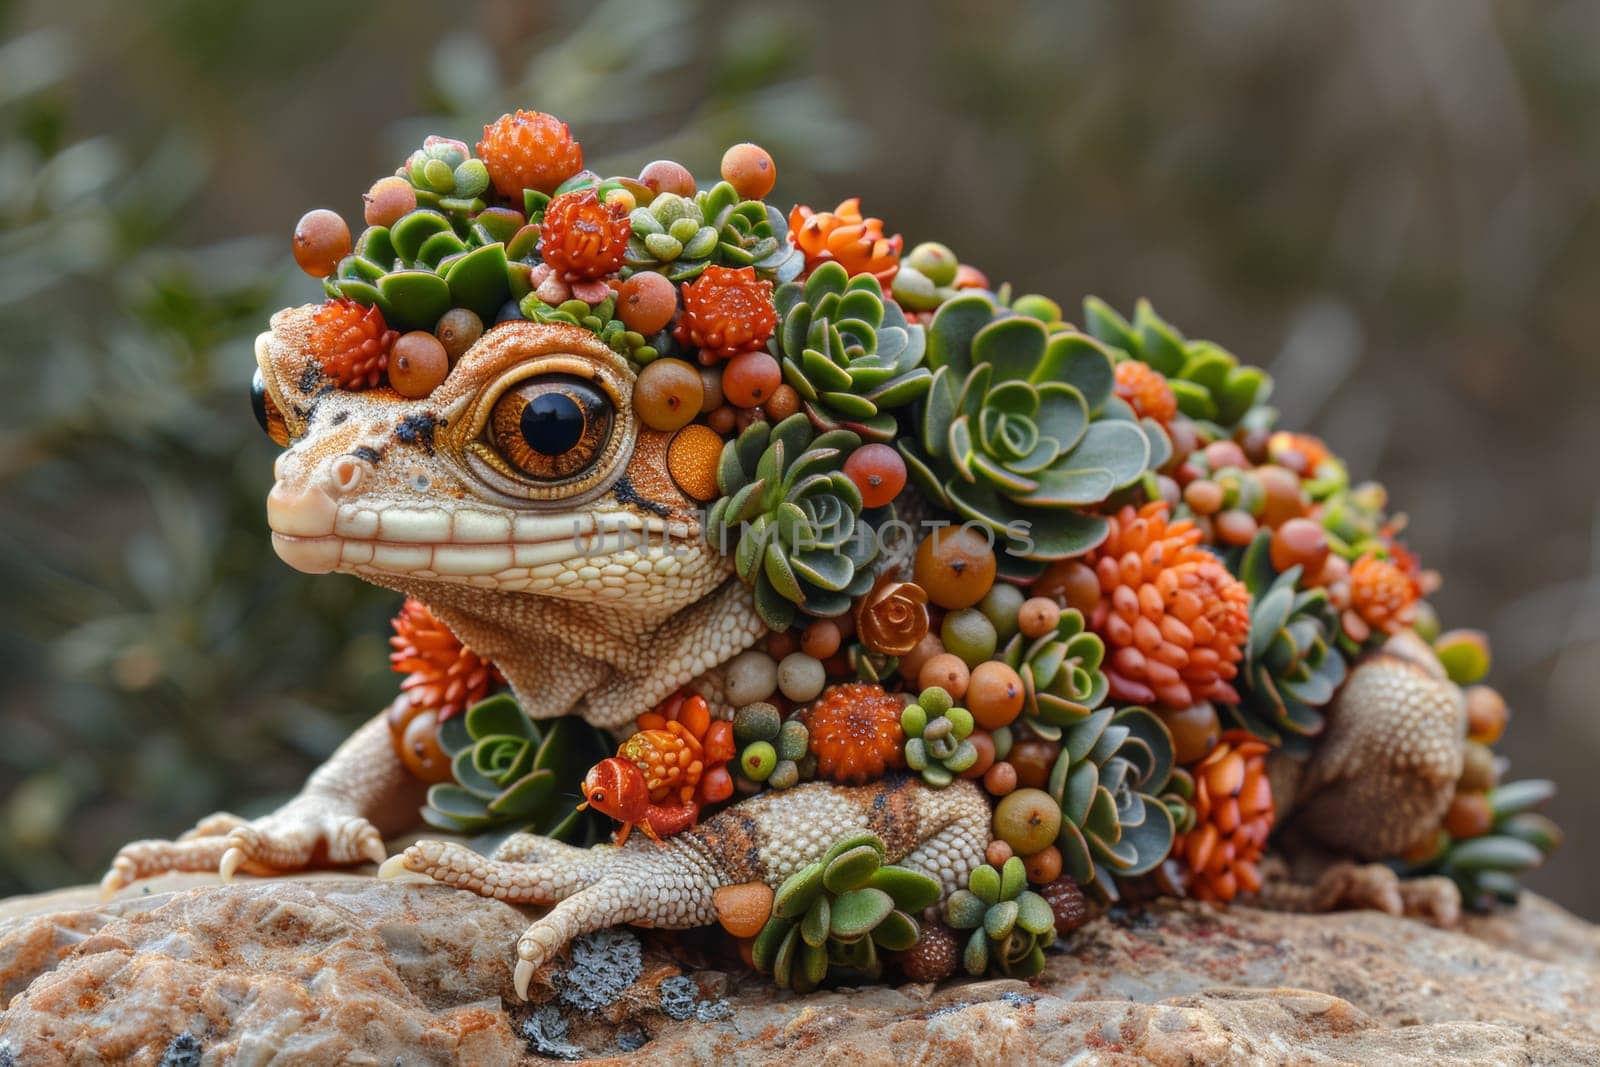 A fantasy frog or toad covered in a bunch of flowers and leaves, AI by starush